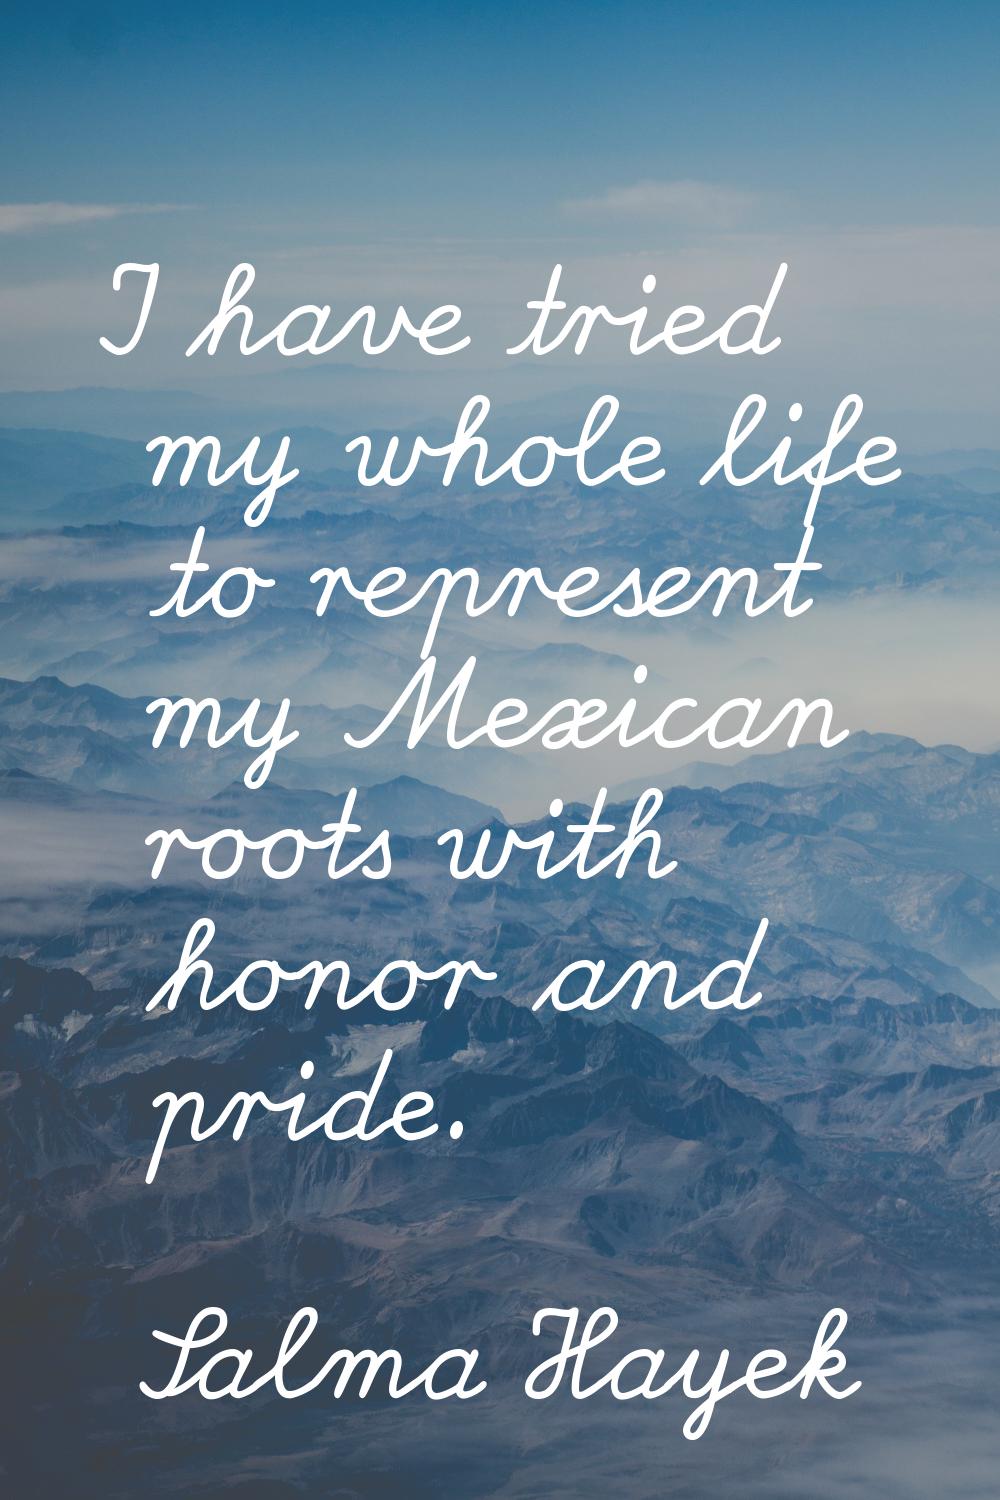 I have tried my whole life to represent my Mexican roots with honor and pride.